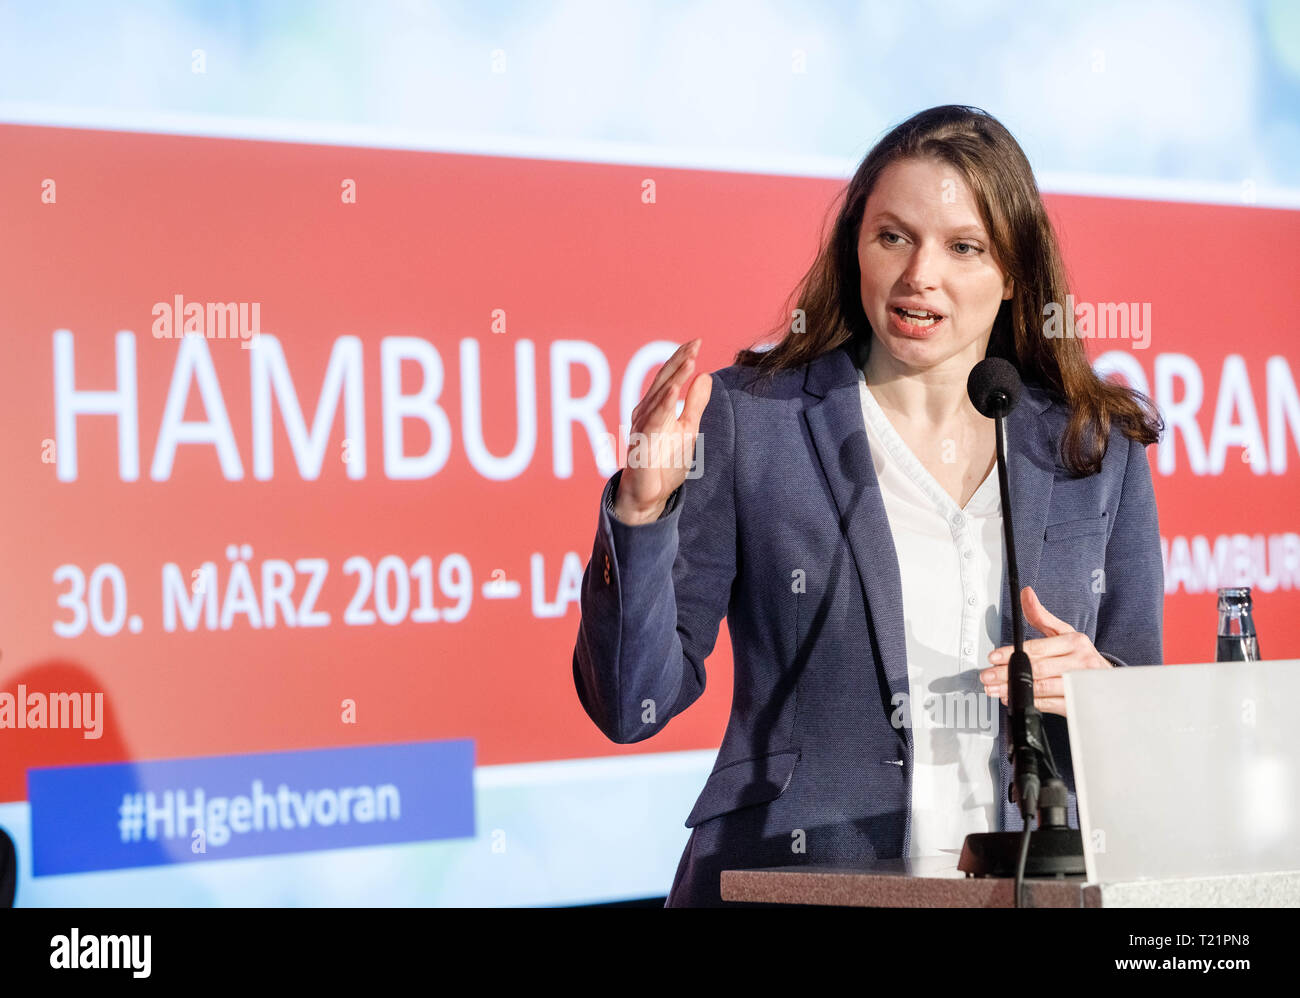 Hamburg, Germany. 30th Mar, 2019. Melanie Leonhard, state chairman of the SPD Hamburg, speaks at the state party conference of her party, which deals with the upcoming election to the districts as well as to the European Parliament. Credit: Markus Scholz/dpa/Alamy Live News Stock Photo